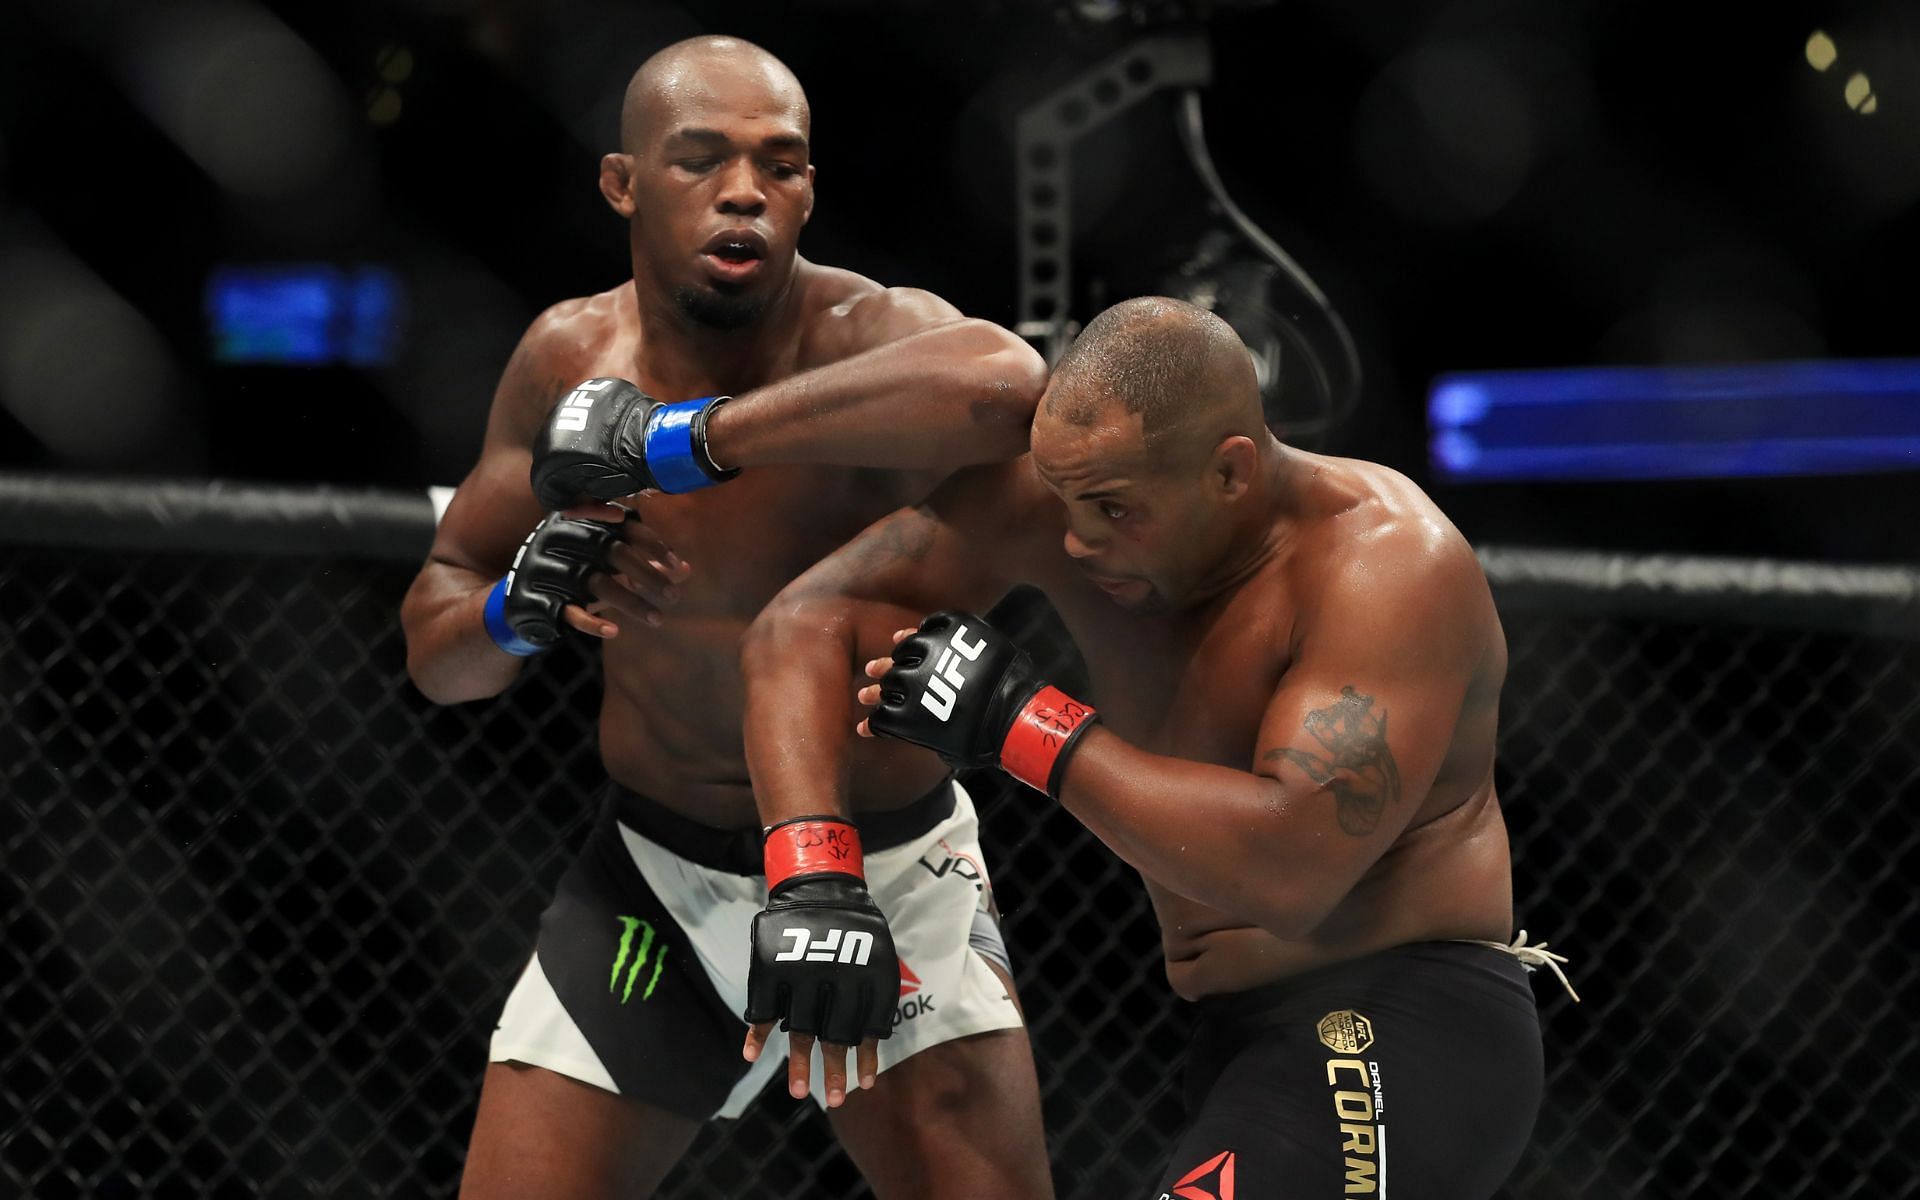 The rivalry between Jon Jones (left) and Daniel Cormier (right) is regarded as one of the most famous and bitter in MMA history [Image courtesy: Getty Images]